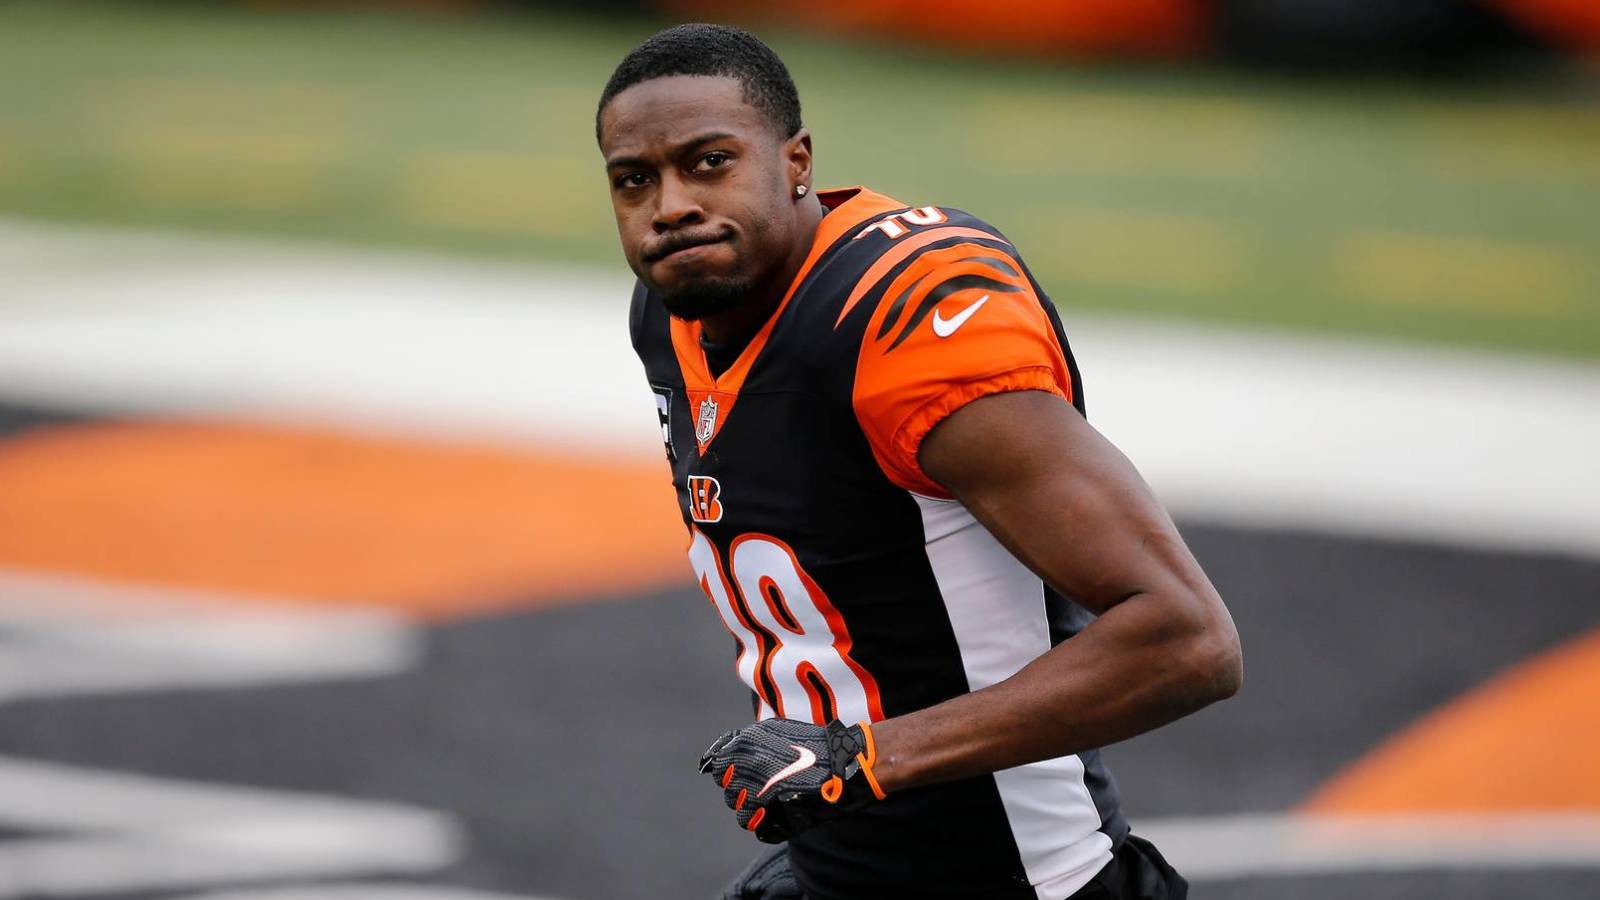 Cardinals to sign seven-time Pro Bowl WR A.J. Green